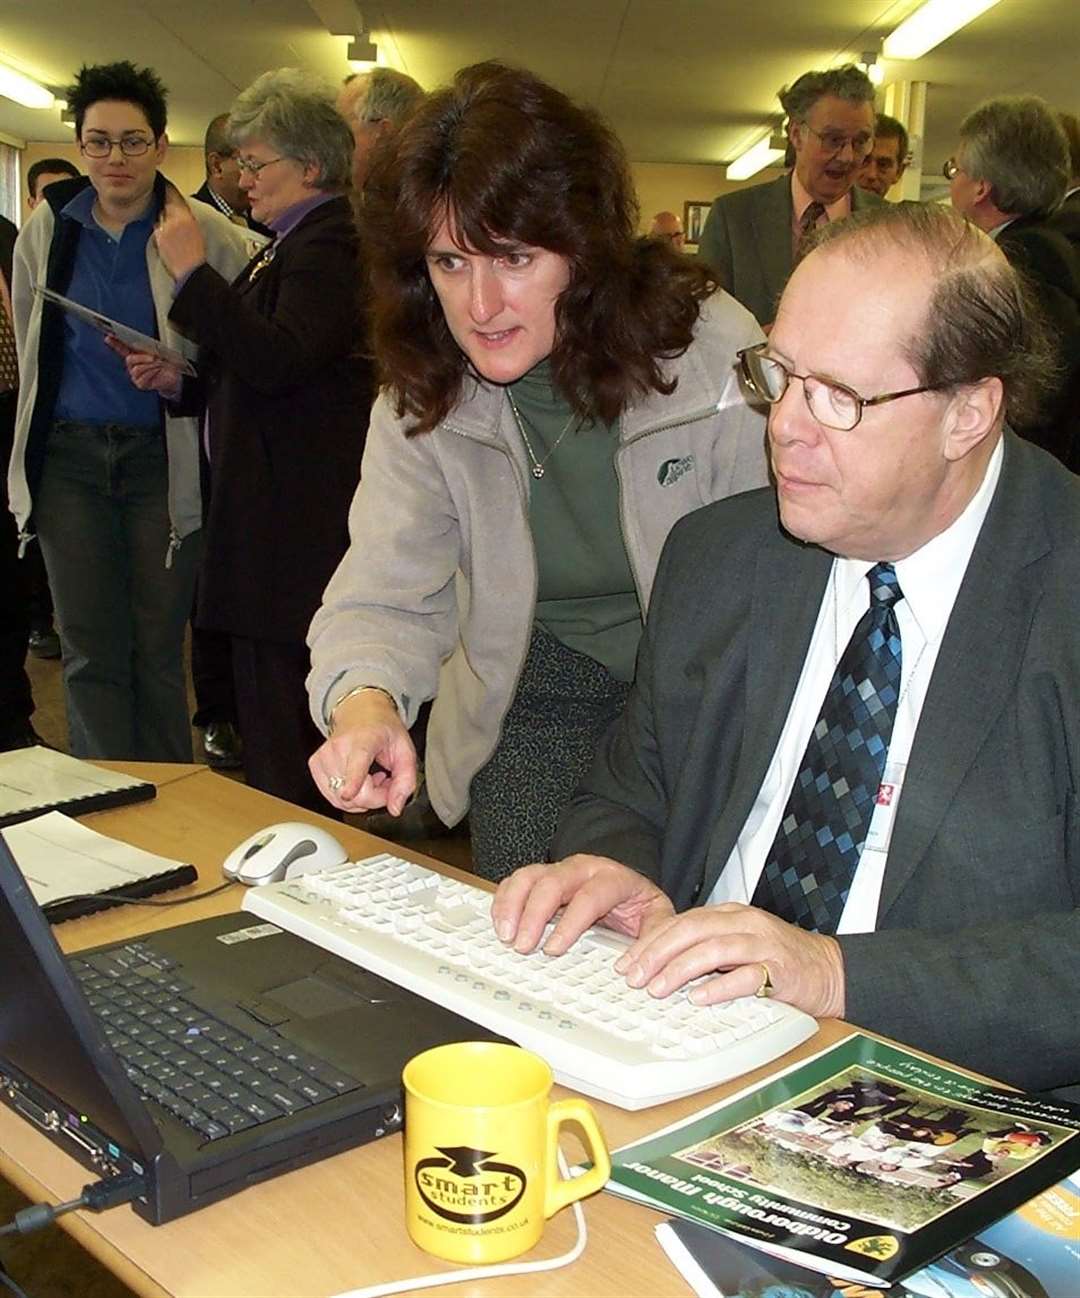 Cllr Daley getting to grips with new technology with guidance from Linda Williams at the opening of the Cyber Cafe at Oldborough Manor Community School in 2002